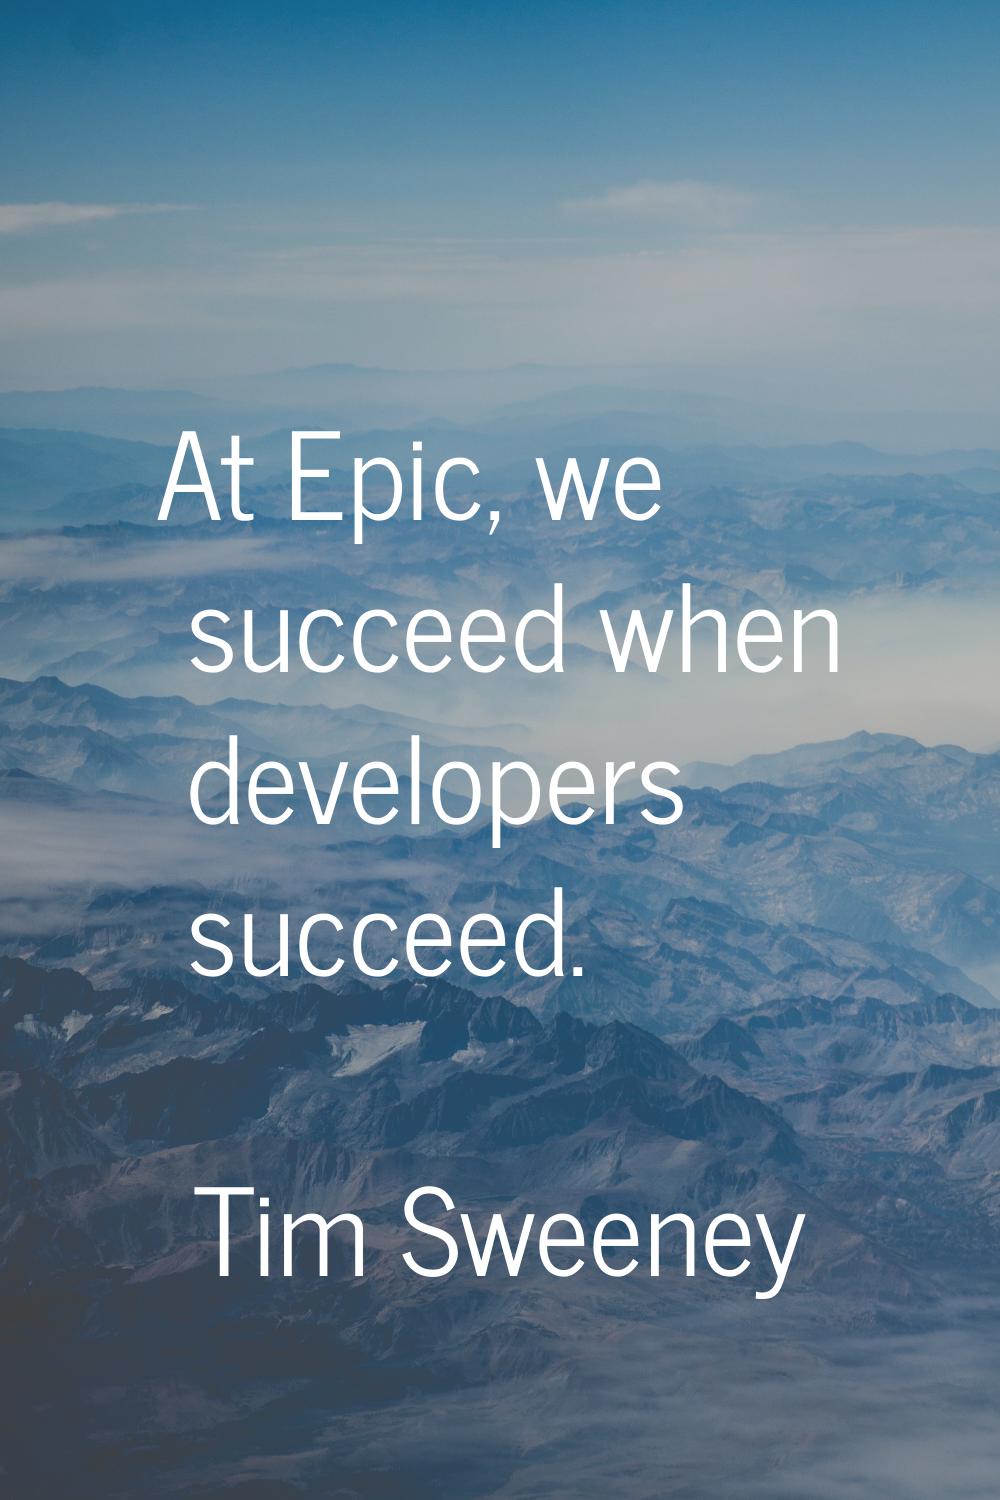 At Epic, we succeed when developers succeed.